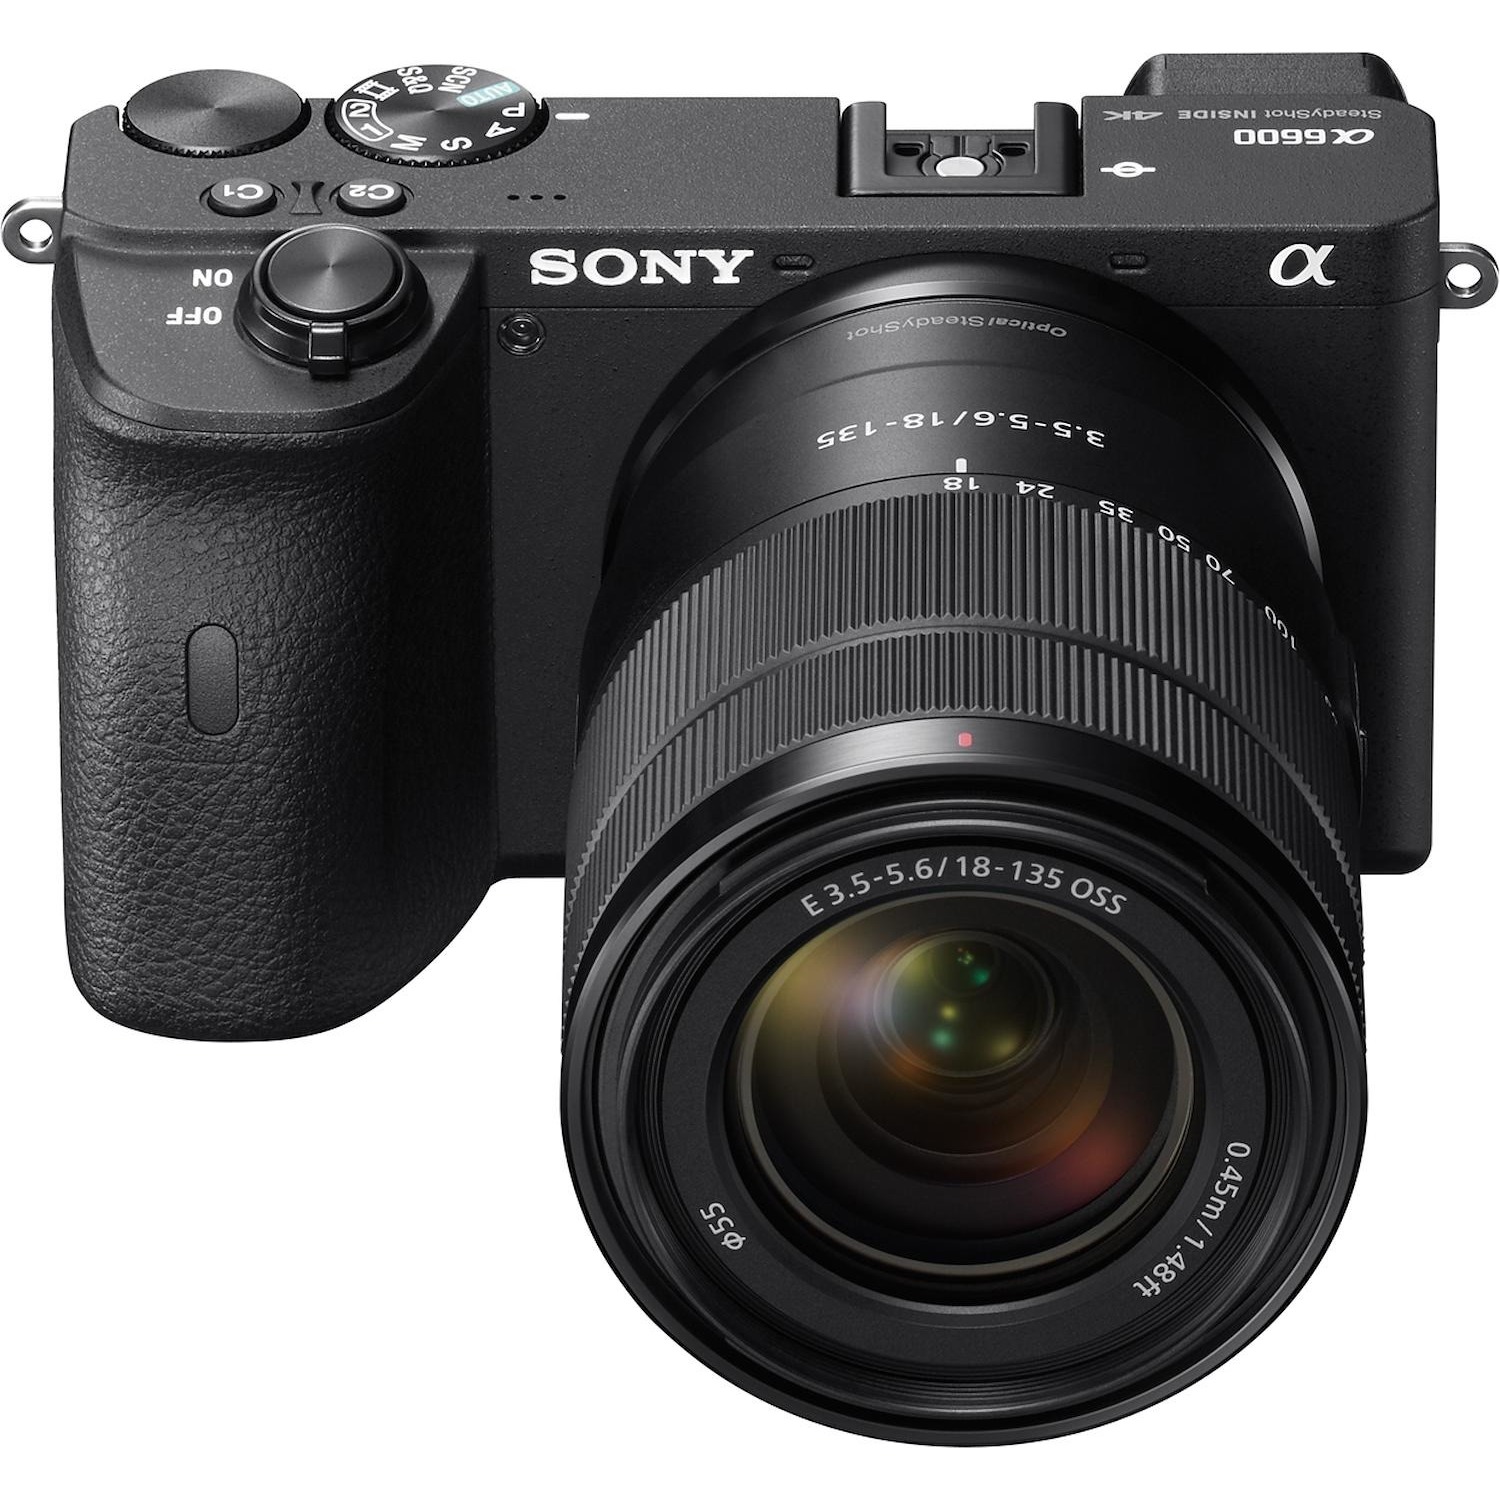 Image of Sony α ILCE6600MB + 18-135mm Kit fotocamere SLR 24,2 MP CMOS 6000 x 4000 Pixel Nero